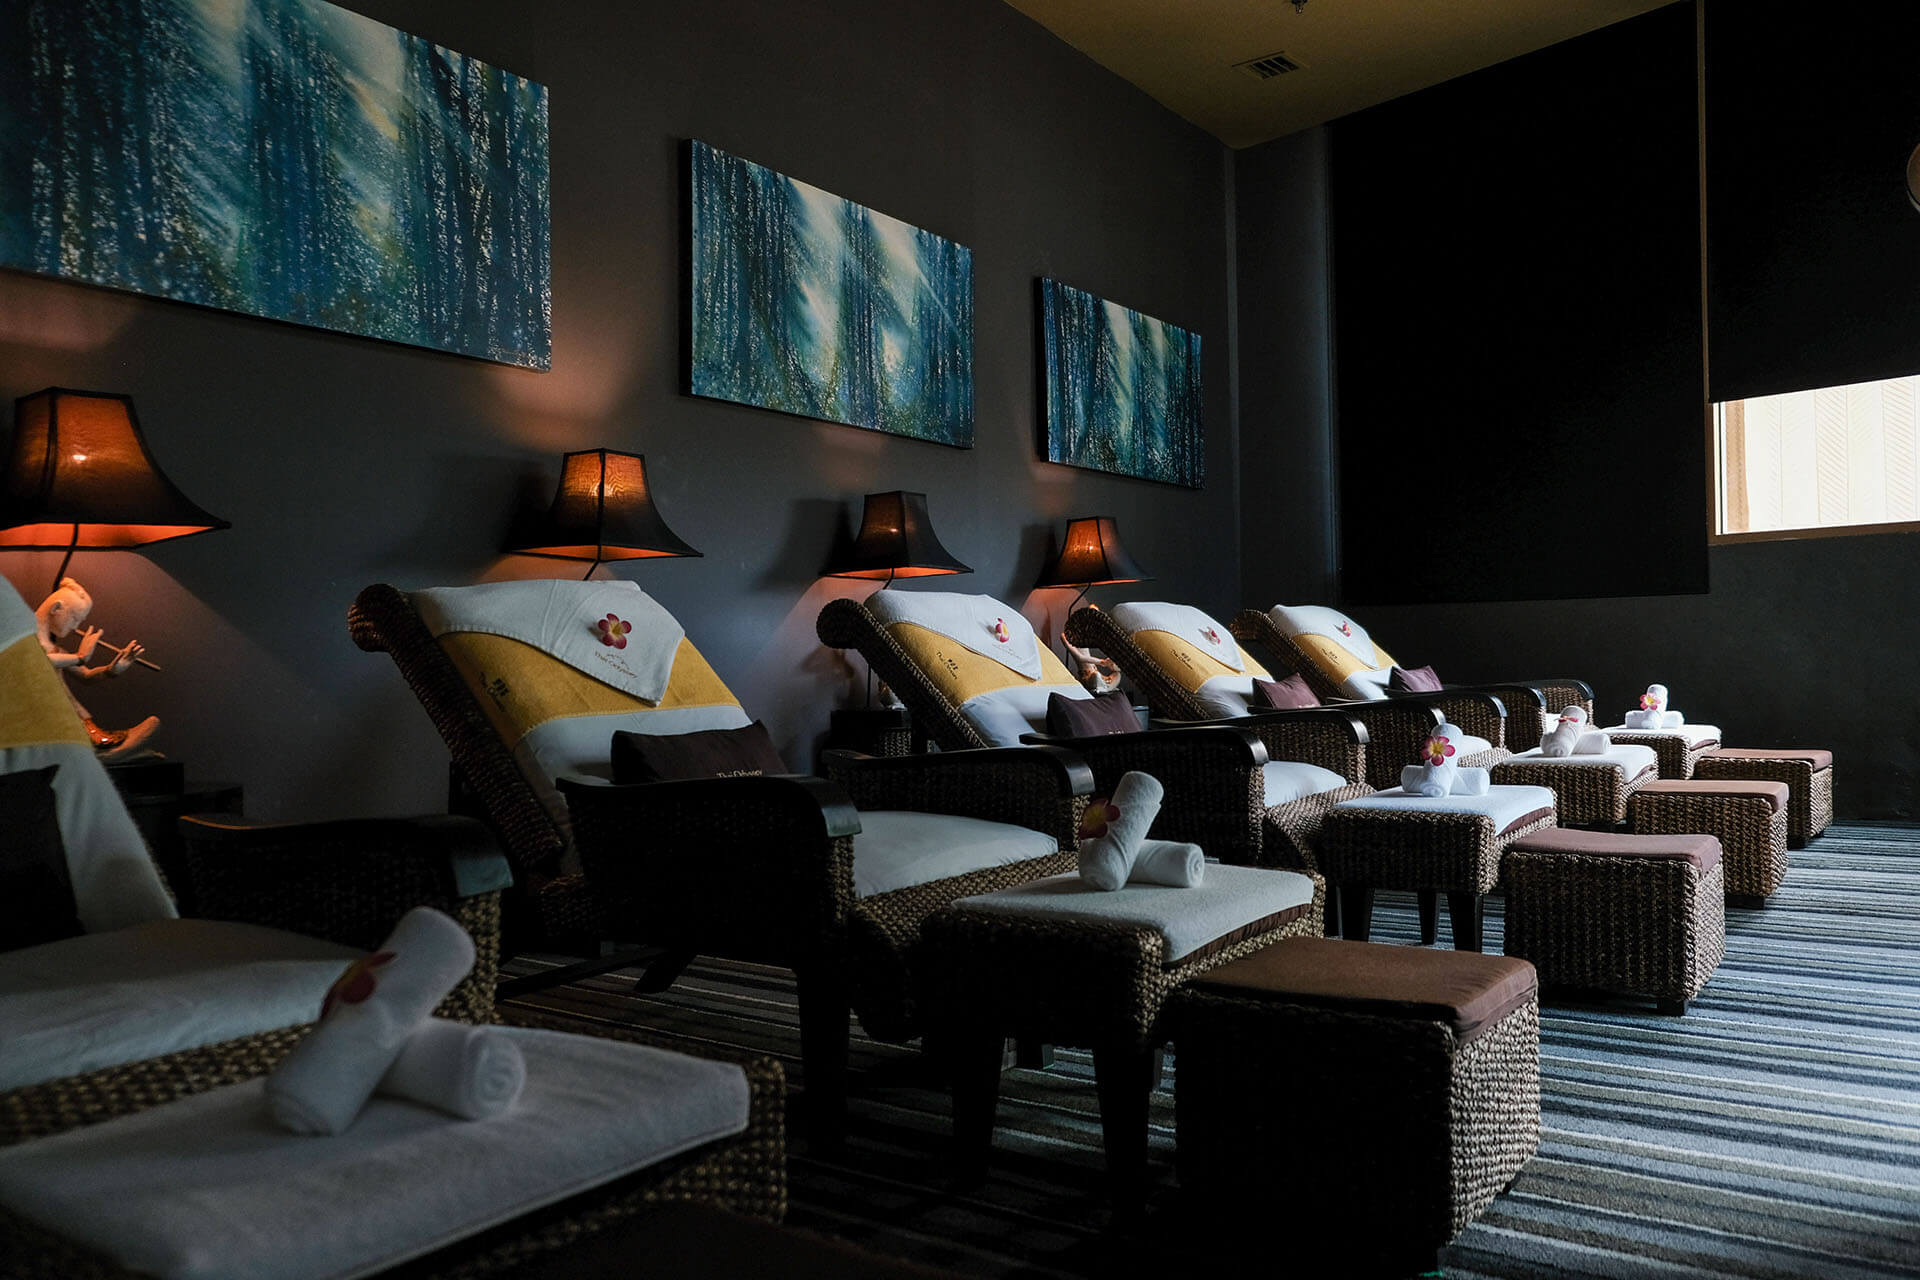 Indulge in an invigorating experience of authentic Thai massage at Thai Odyssey!